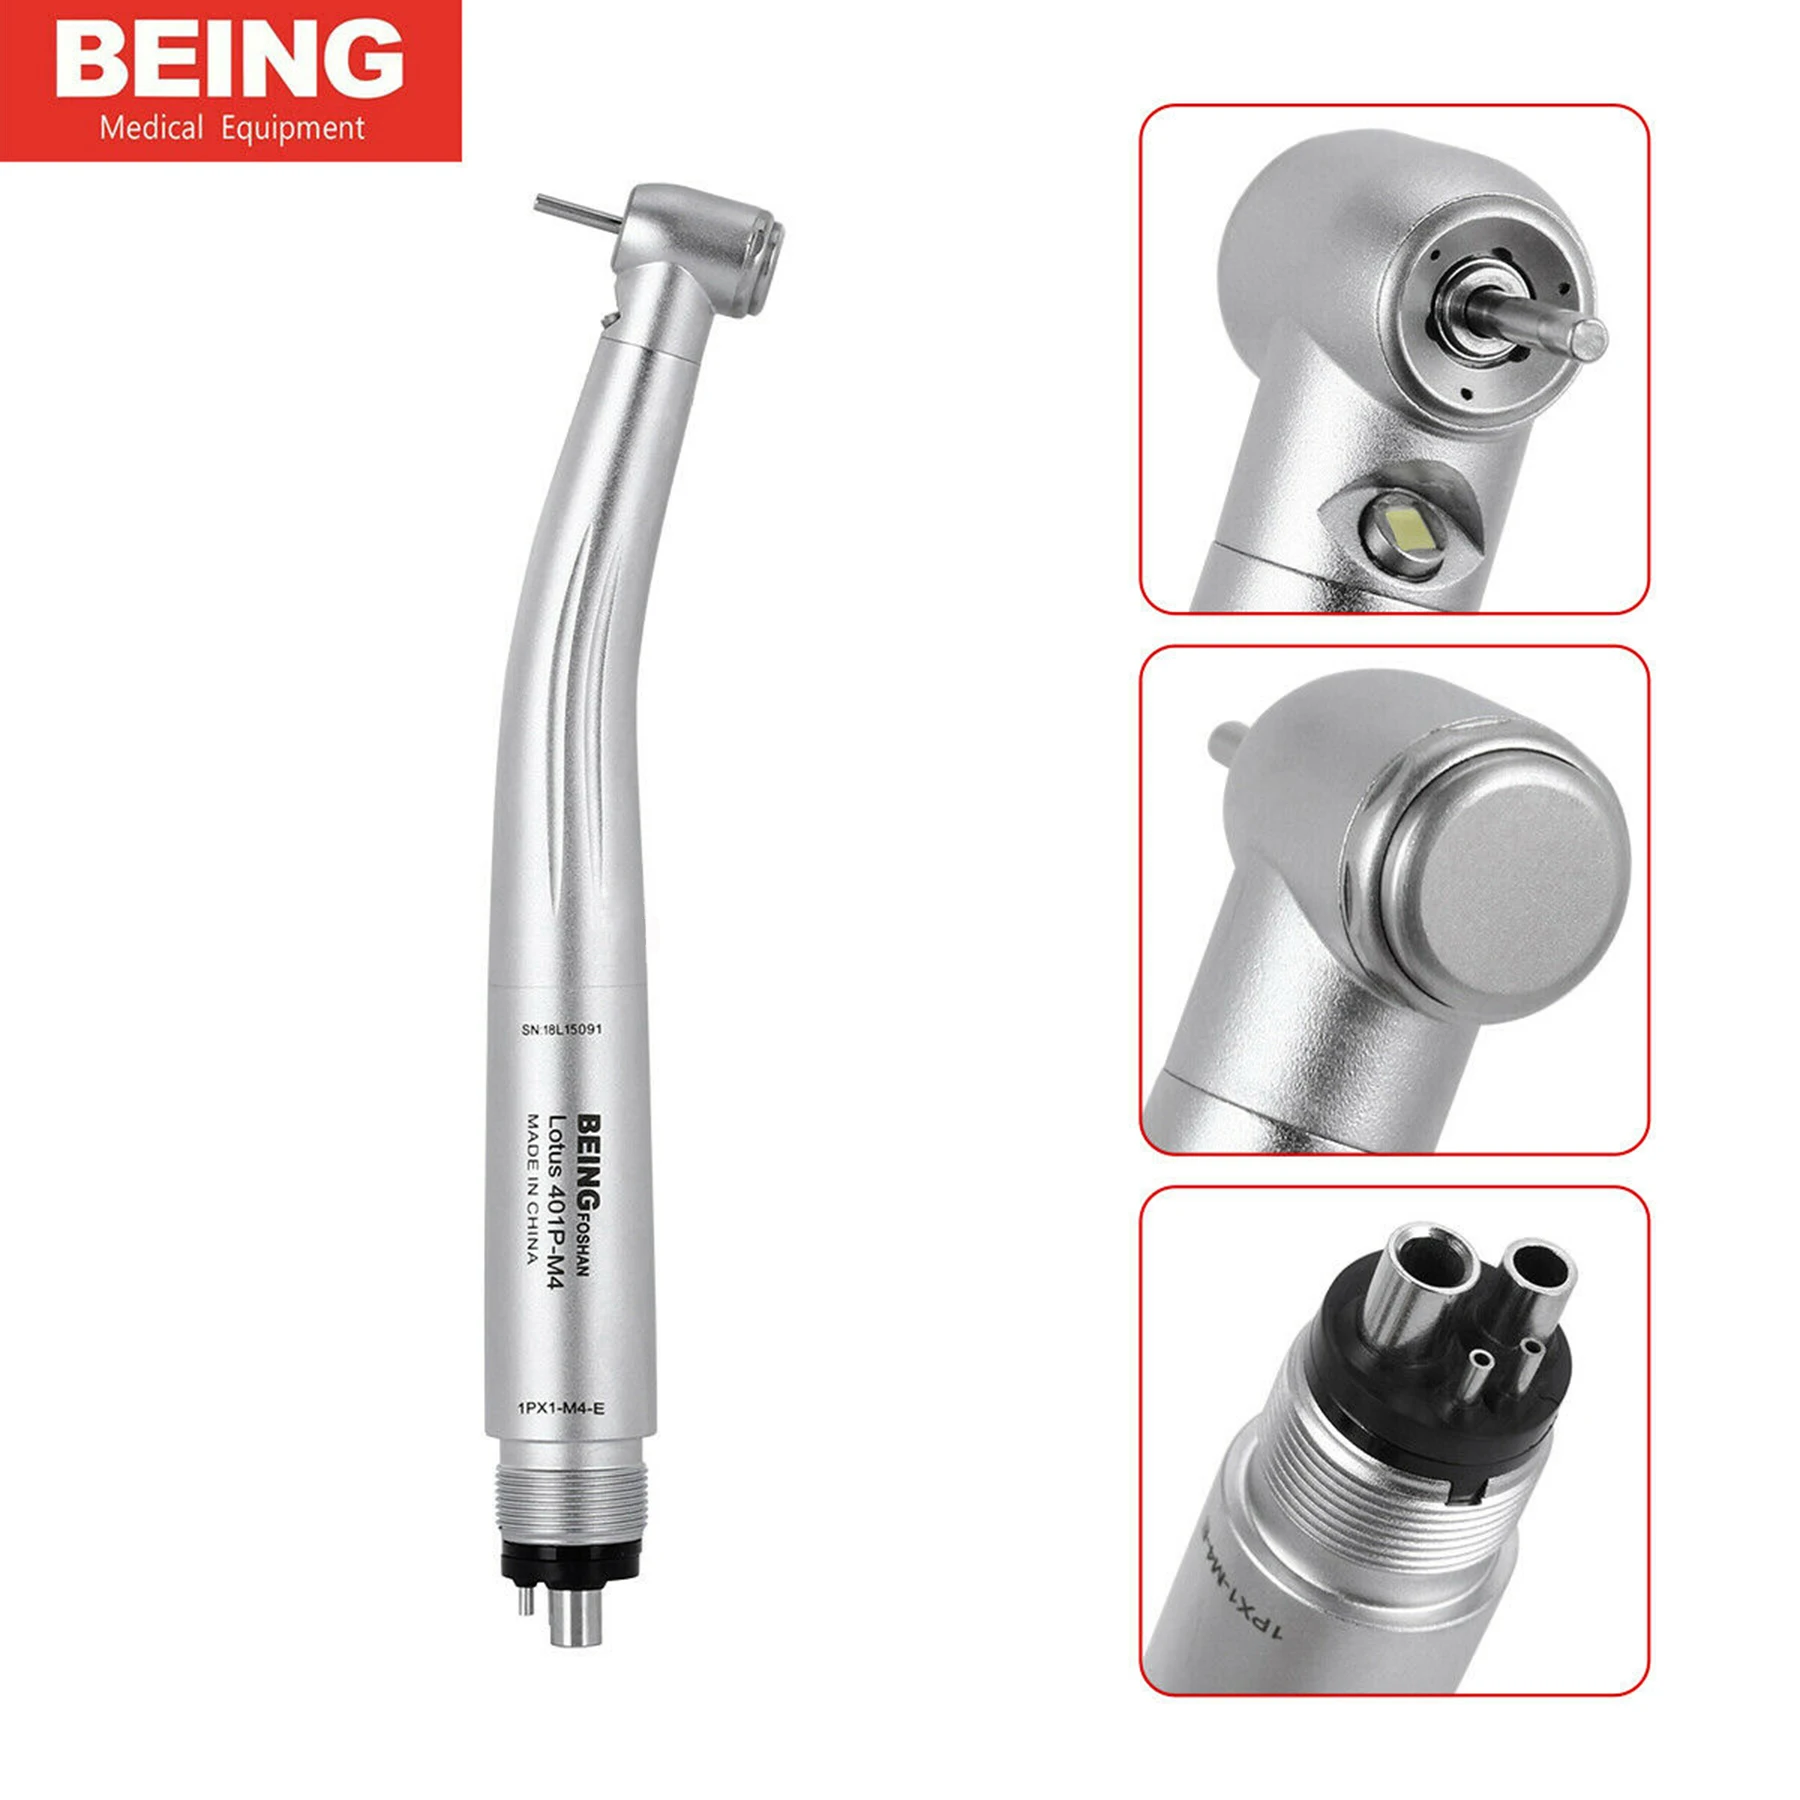 COXO YUSENDET 2 Holes Dental High Speed Colorful Handpiece Air Turbine Anti-retraction Surgical Handpiece